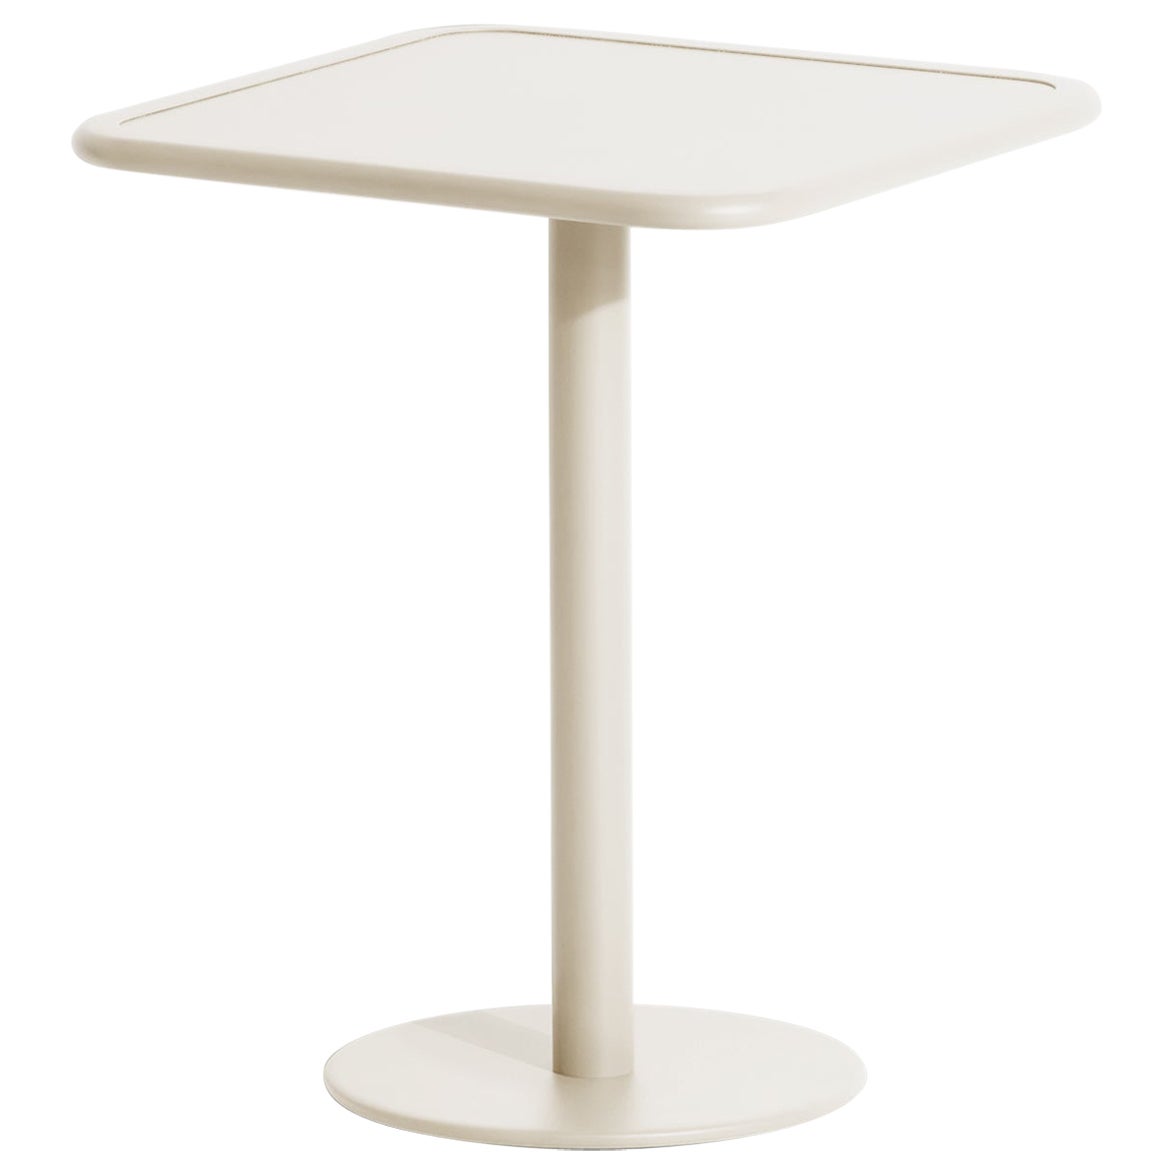 Petite Friture Week-End Bistro Square Dining Table in Ivory Aluminium, 2017 For Sale